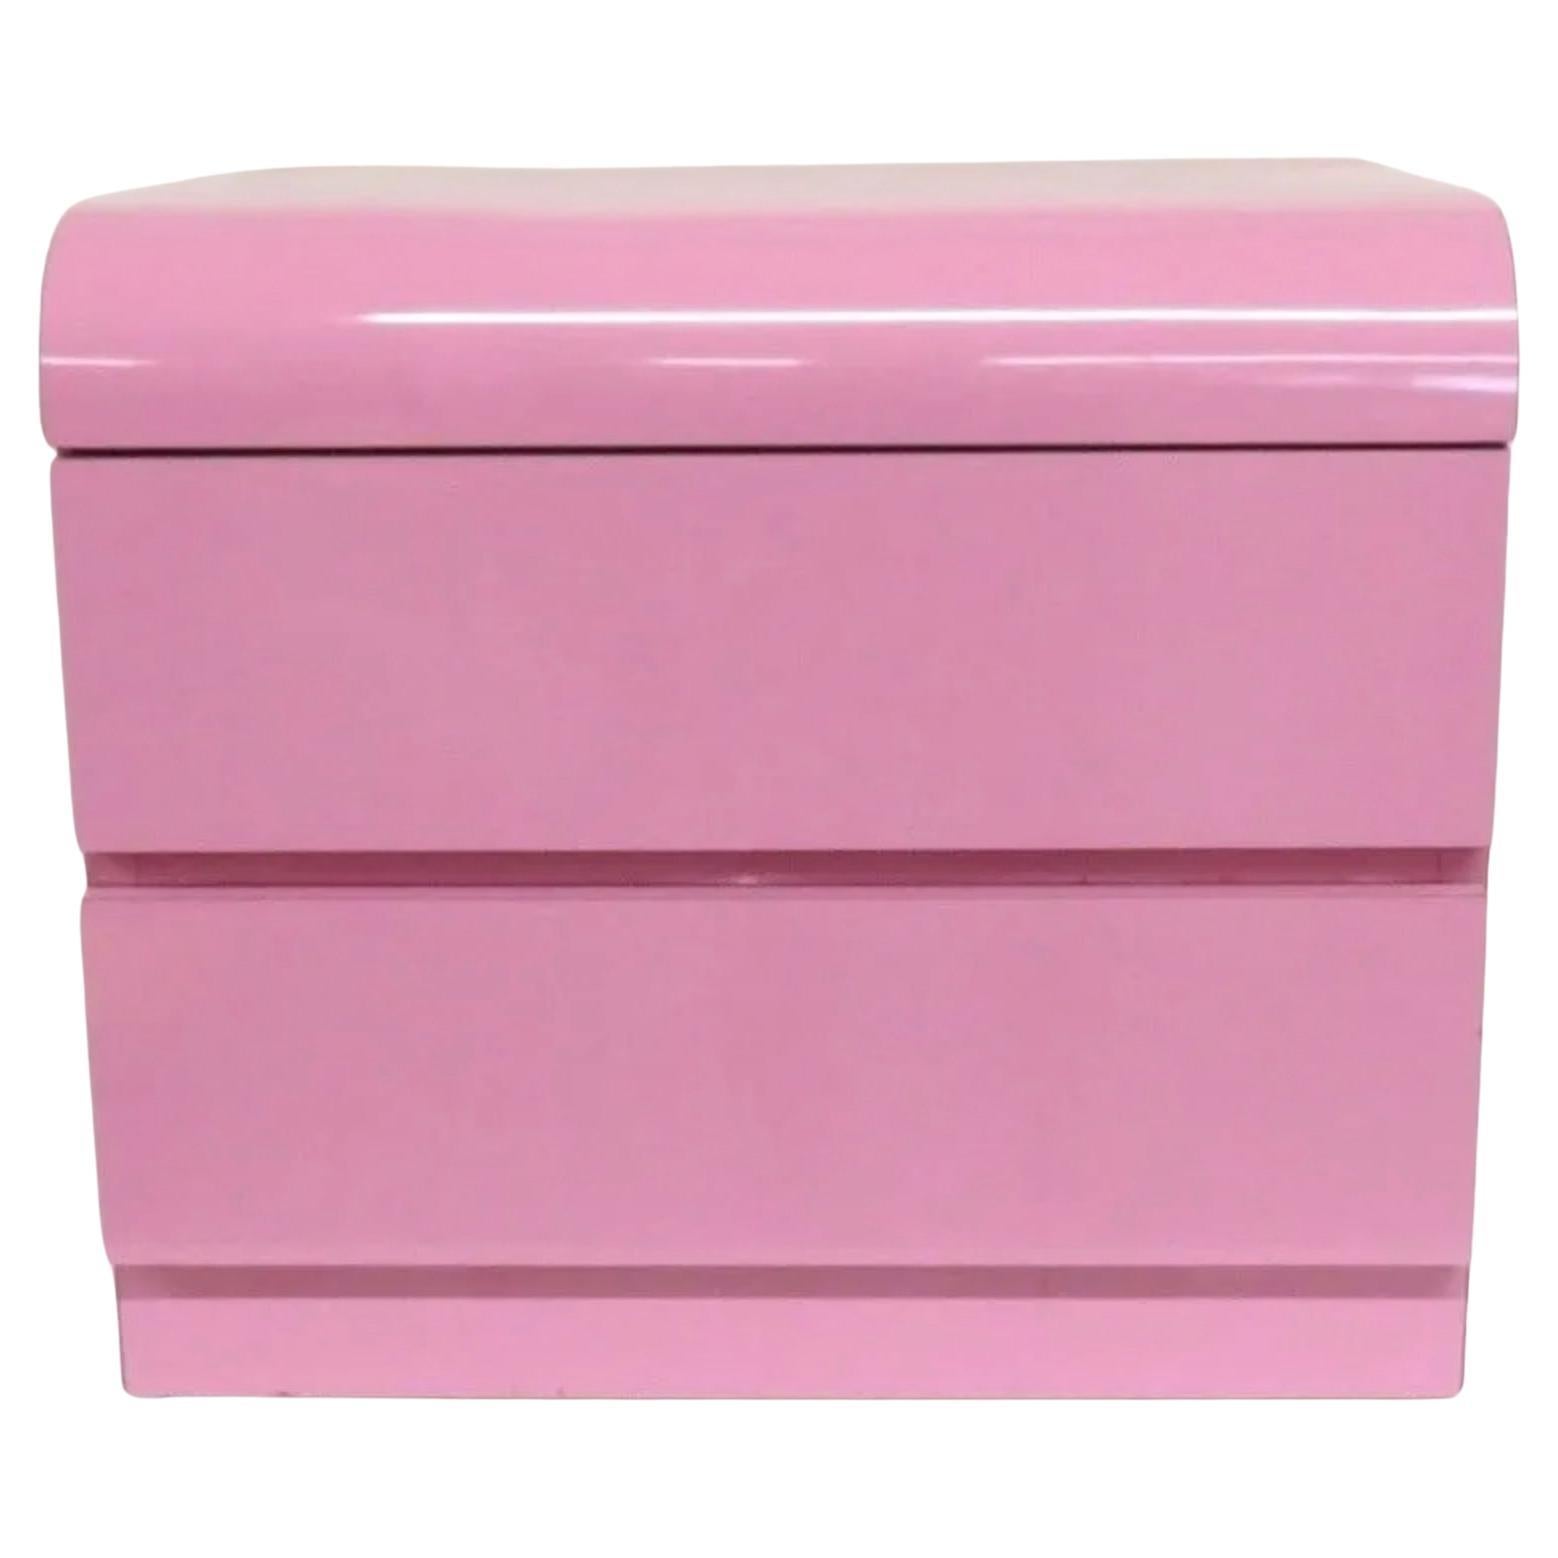 Beautiful post modern bubblegum pink gloss laminate waterfall front 2 drawer nightstand, circa 1980. Very clean inside and out almost like new. Look at photos. Both drawers have metal glides with stops. Great for home, office, art studio/gallery or